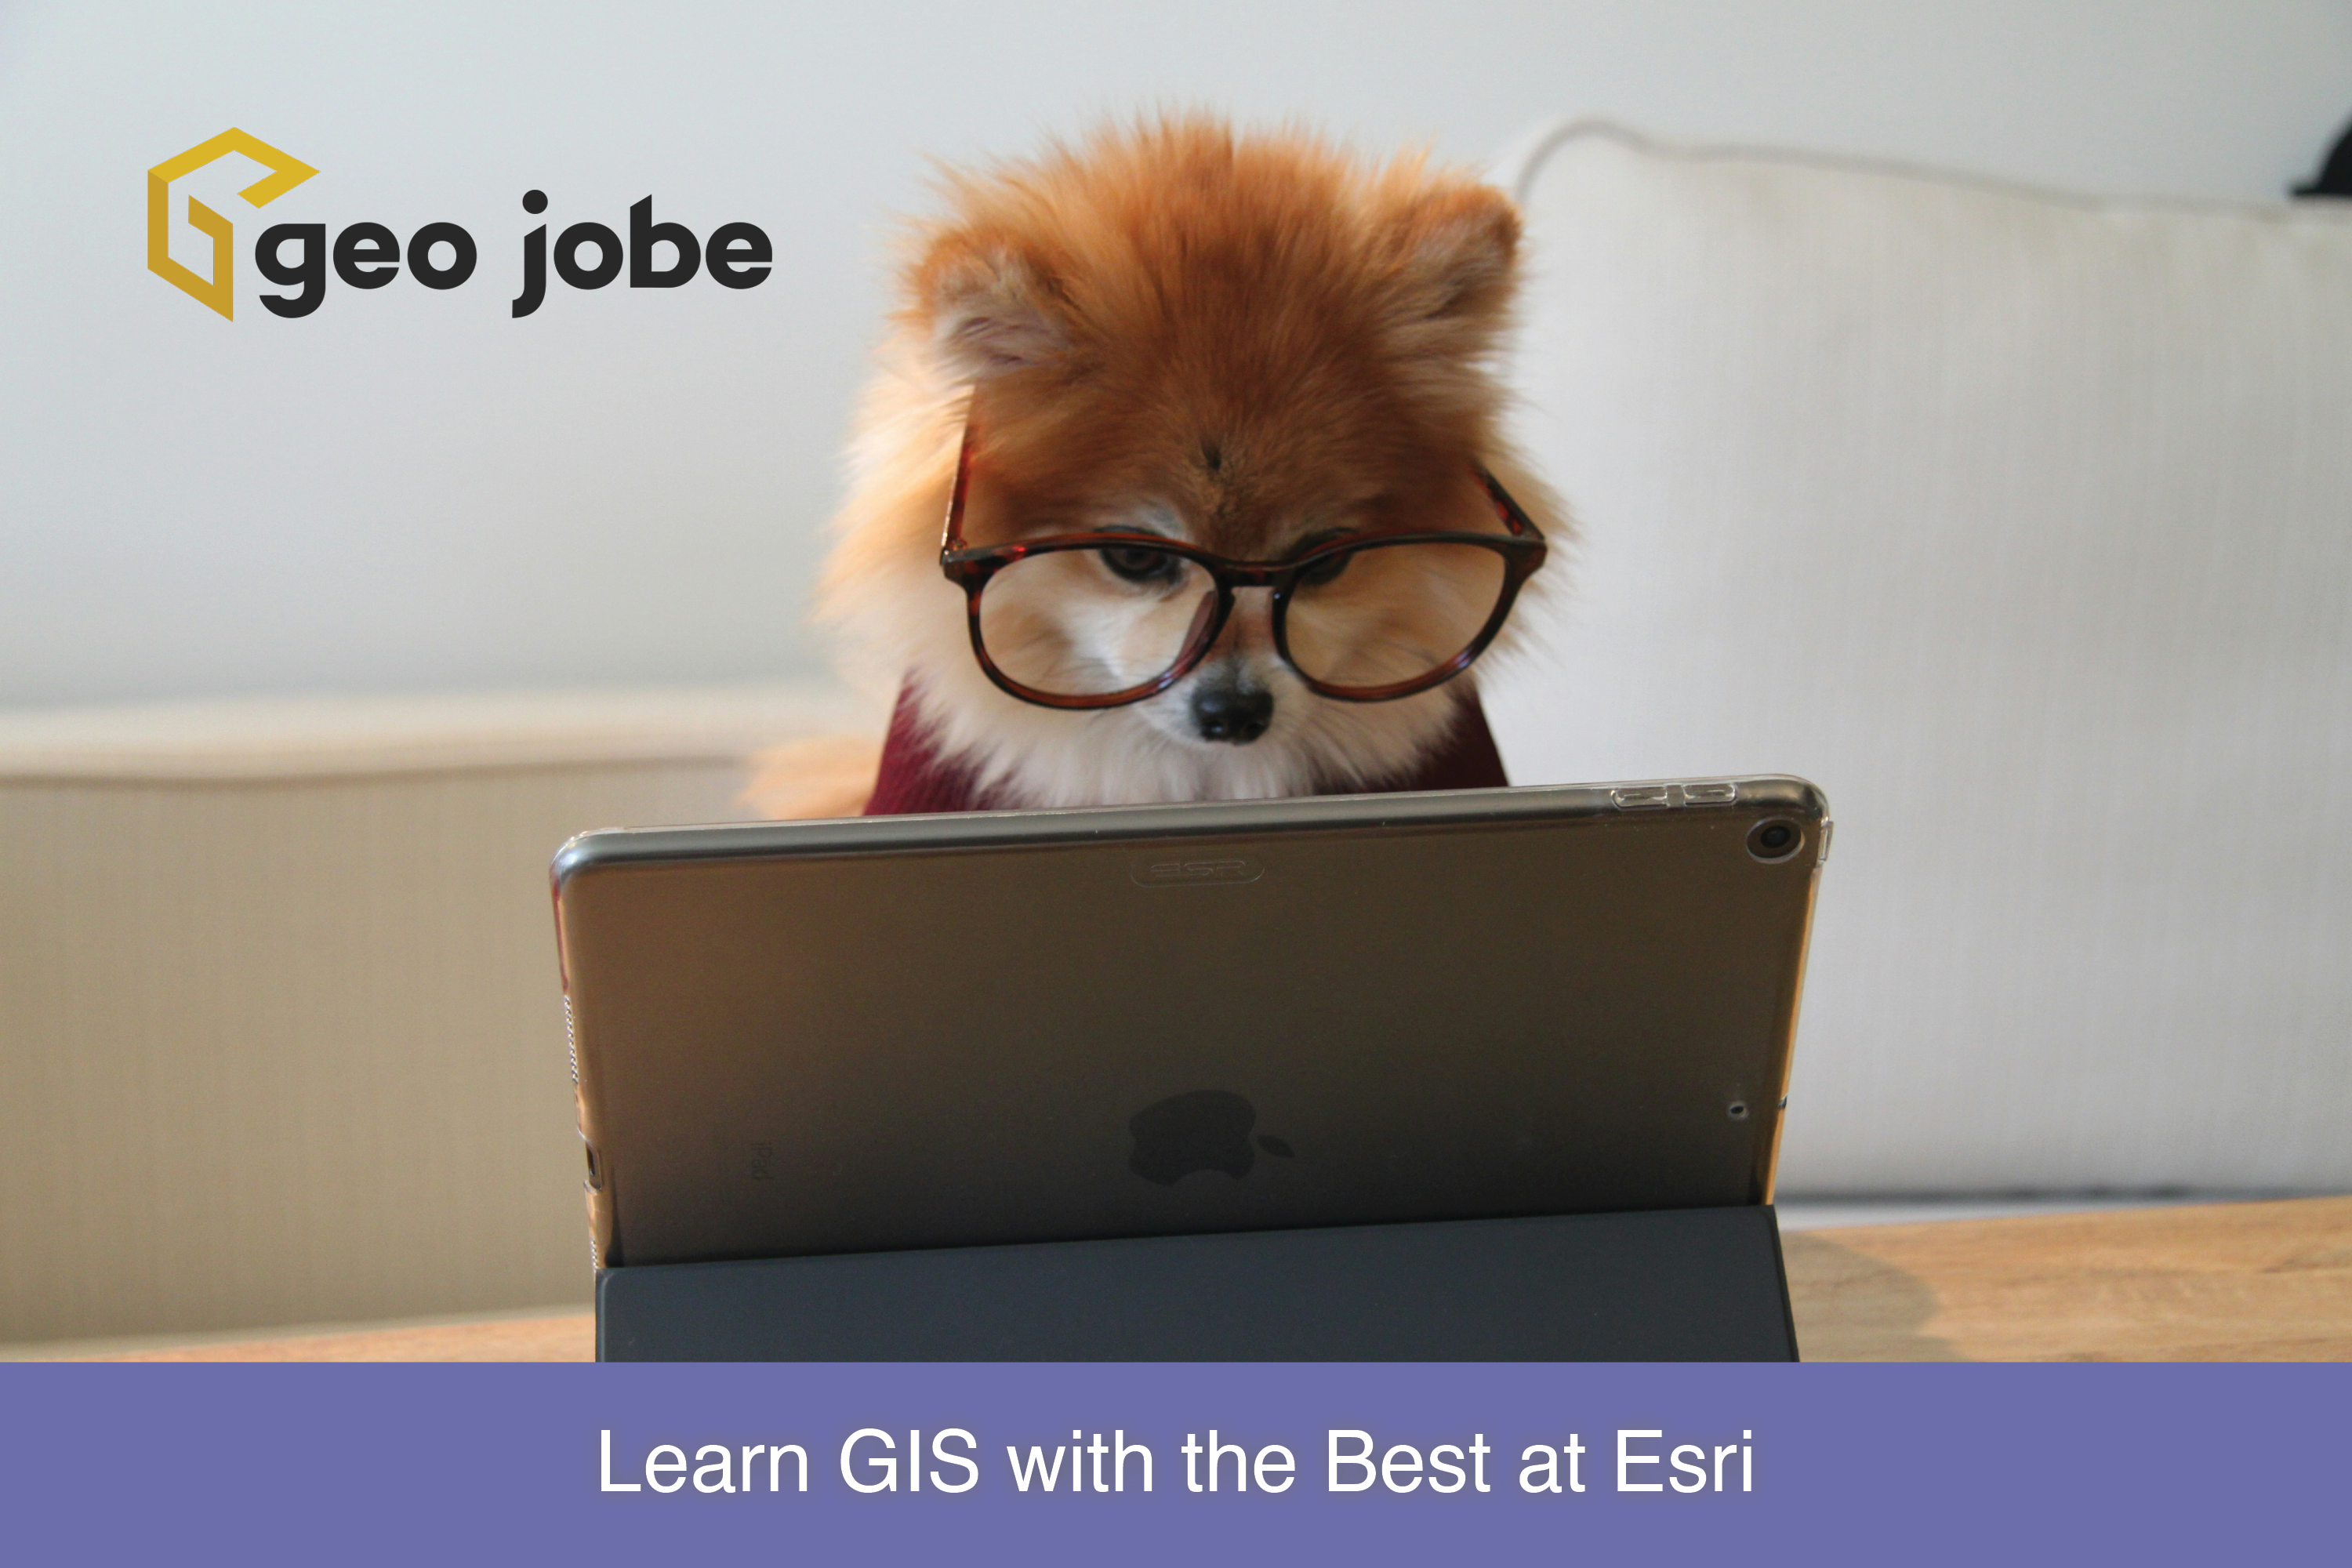 Learn GIS with the Best at Esri